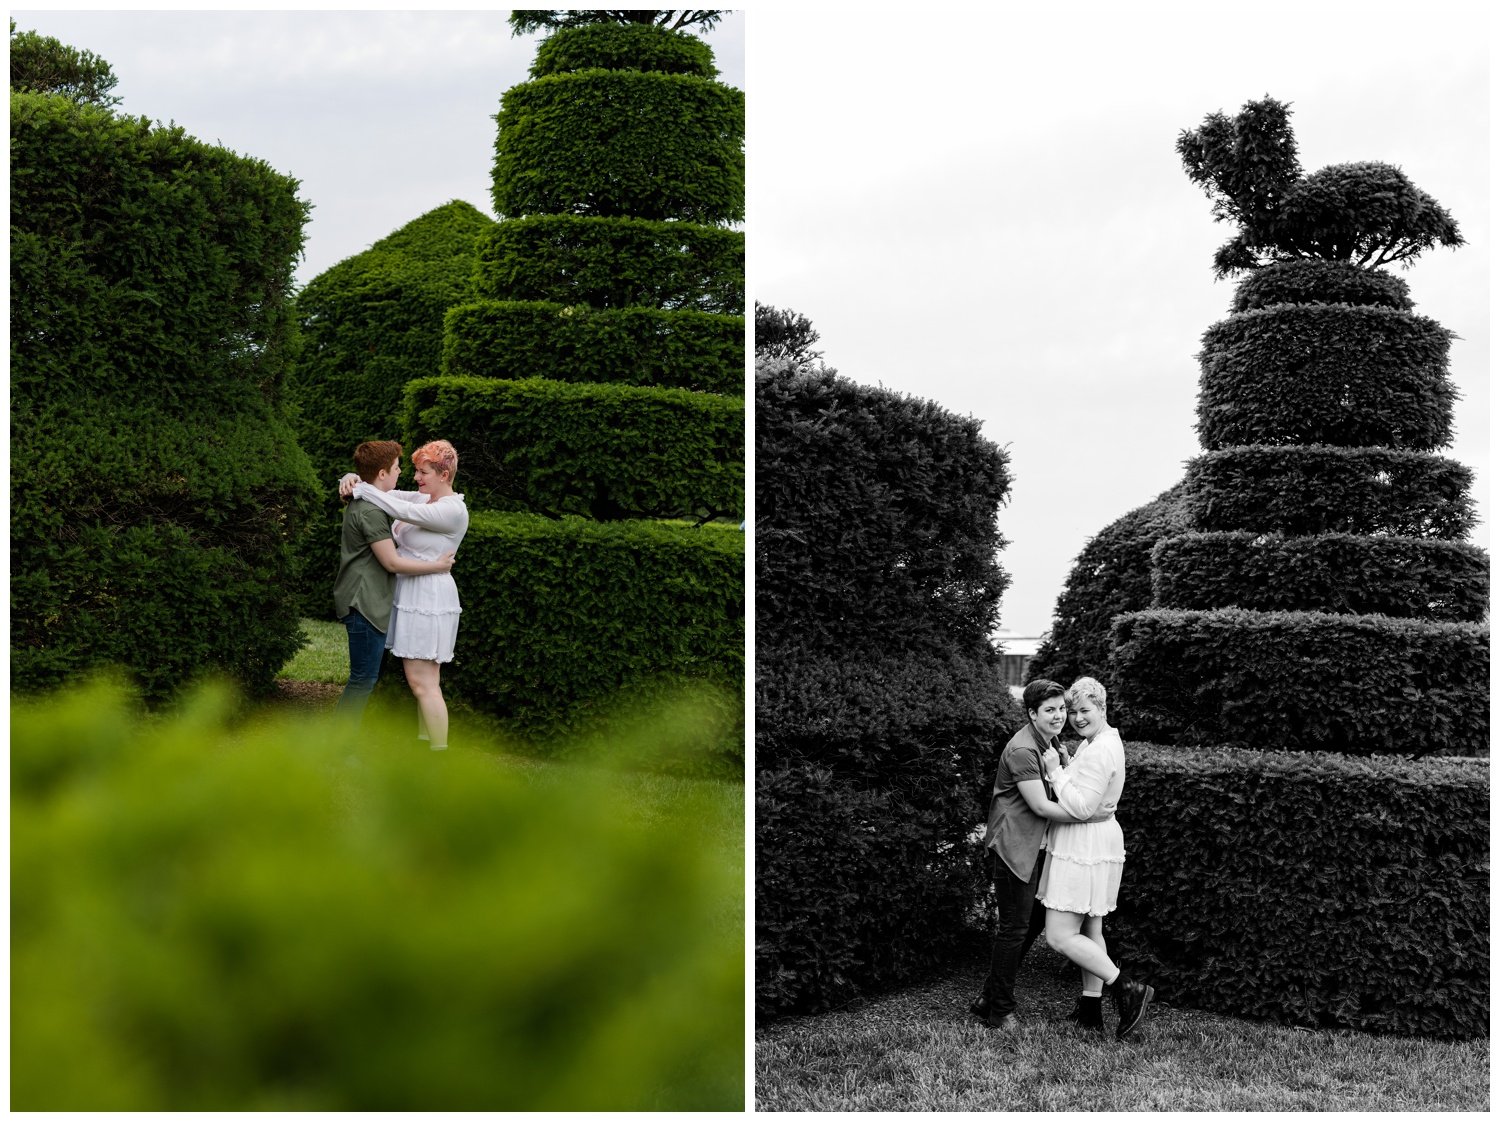 Queer-Engagement-Photos-Longwood-Gardens-Philly-Photographer-LGBTQ-17.jpg